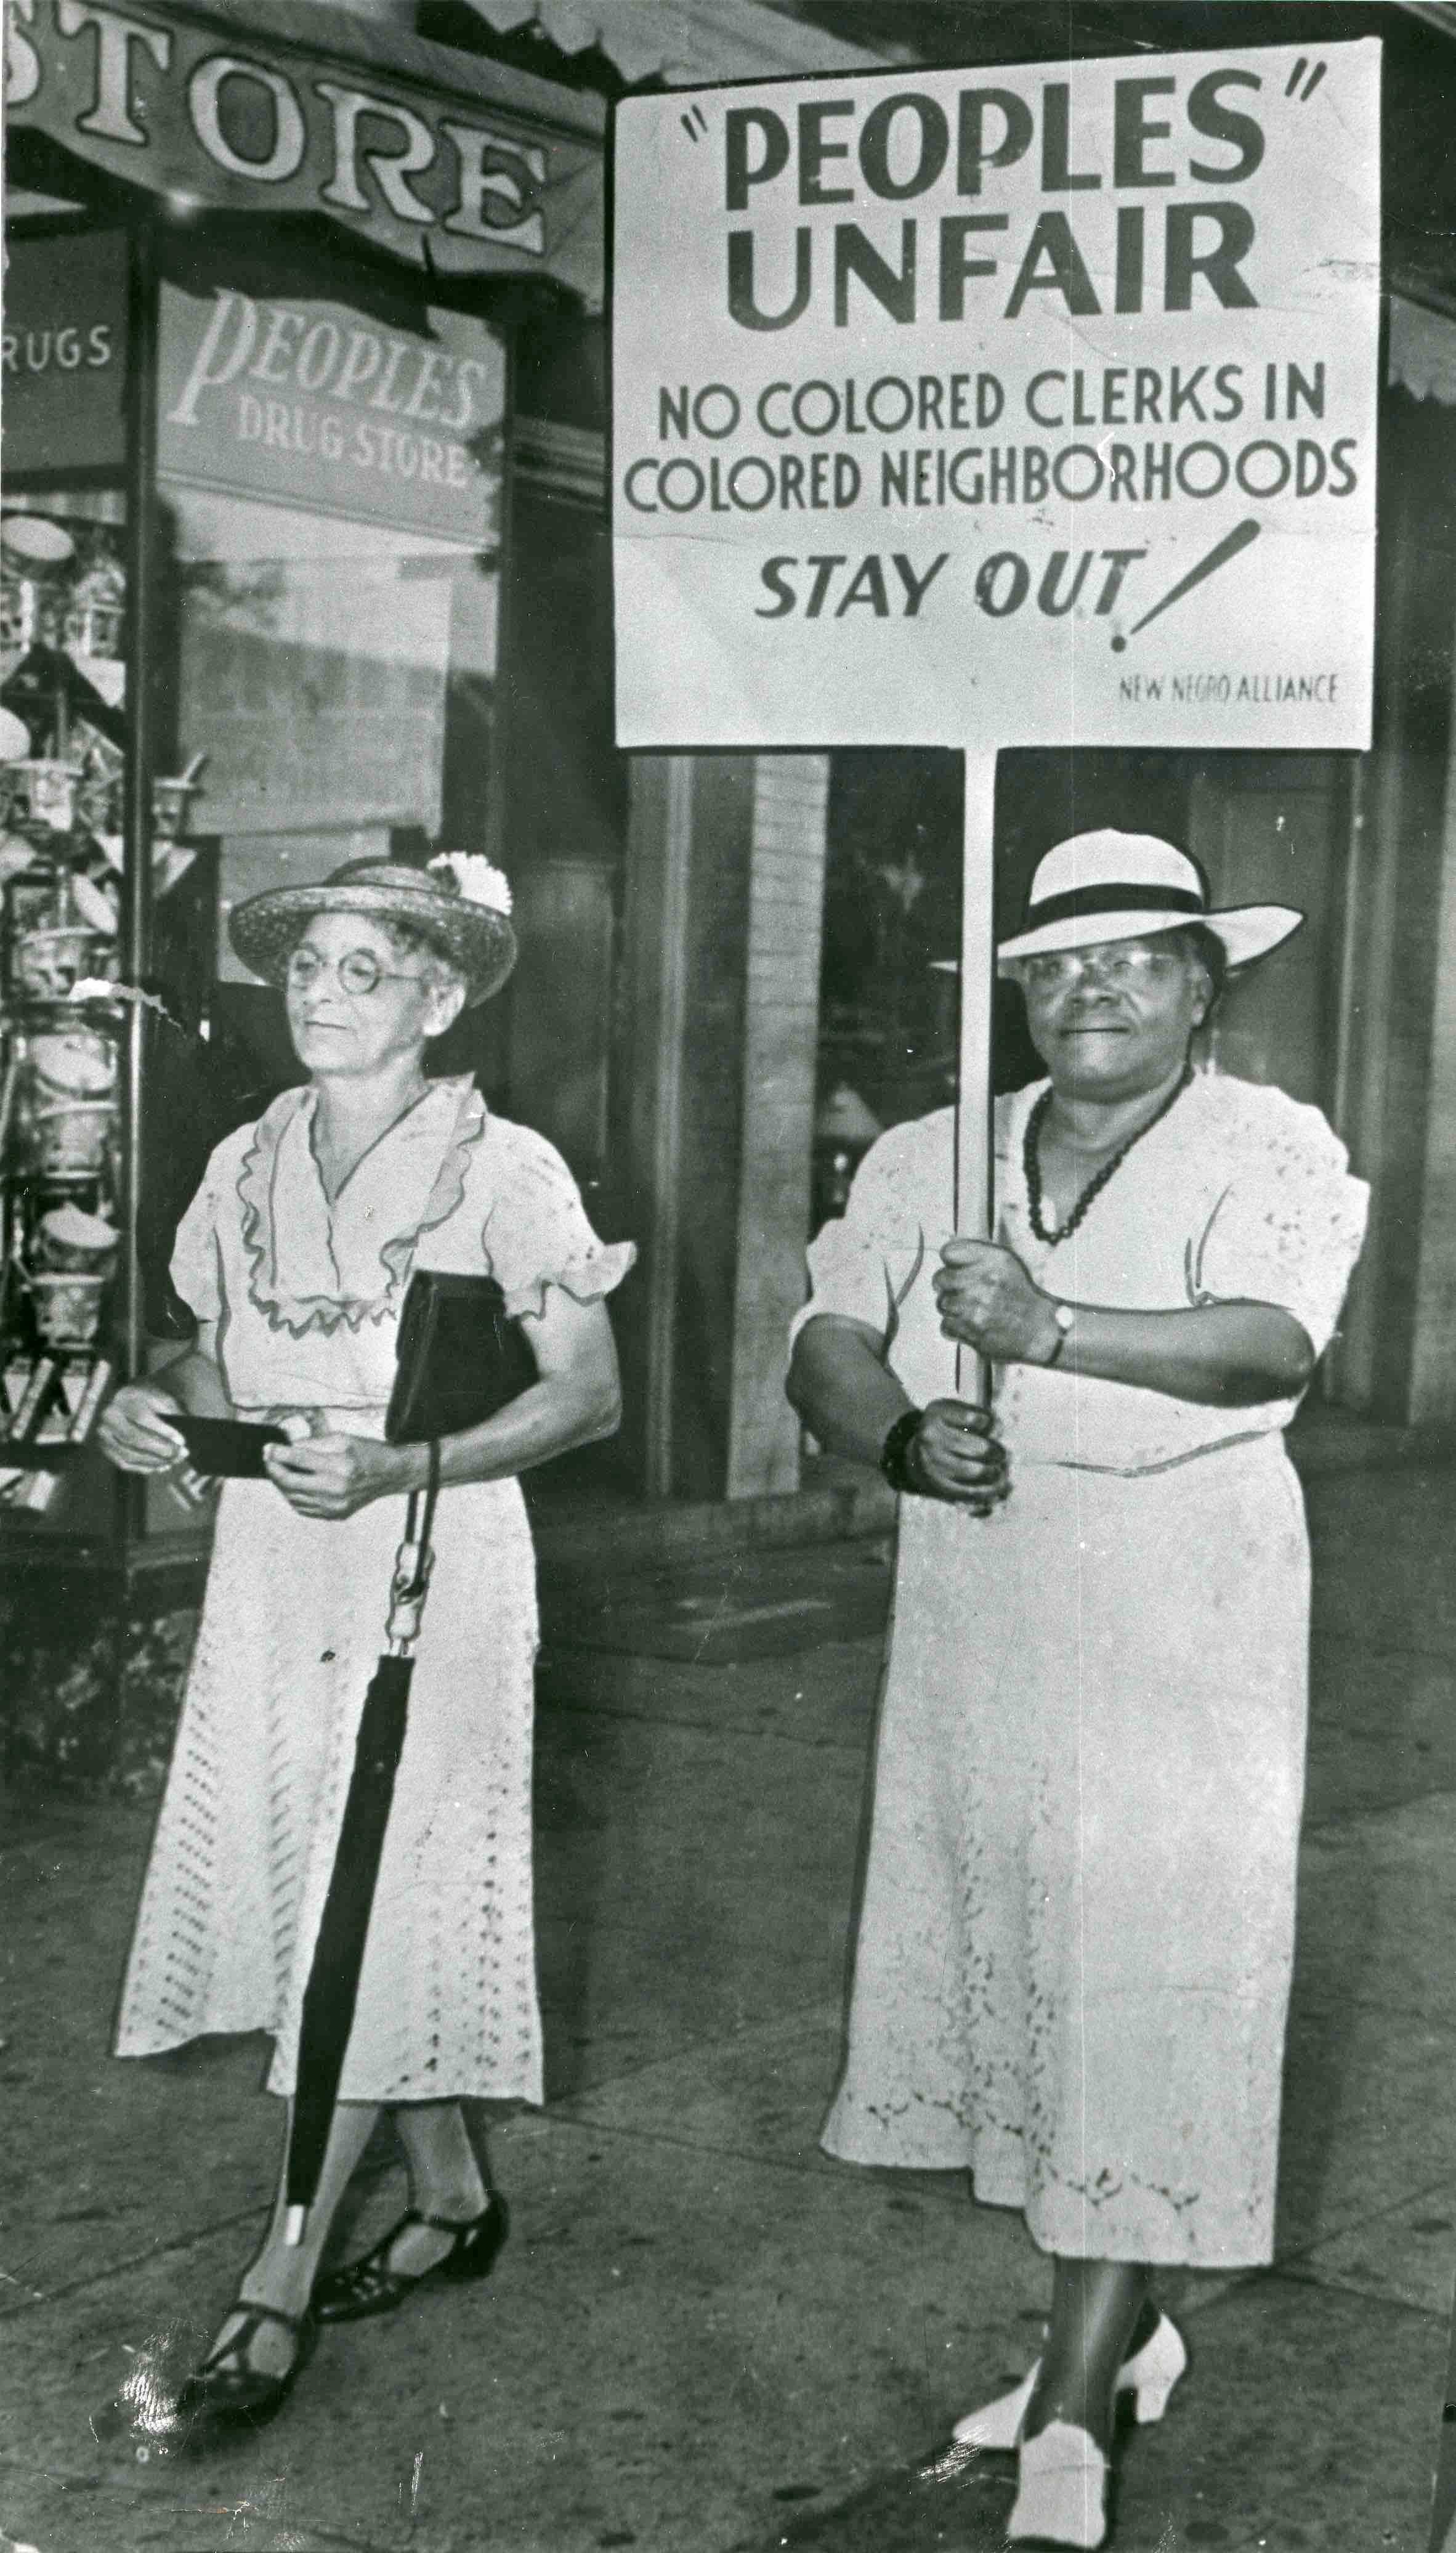 Photograph of Mary McLeod Bethune in New Negro Alliance protest of Peoples Drug Store